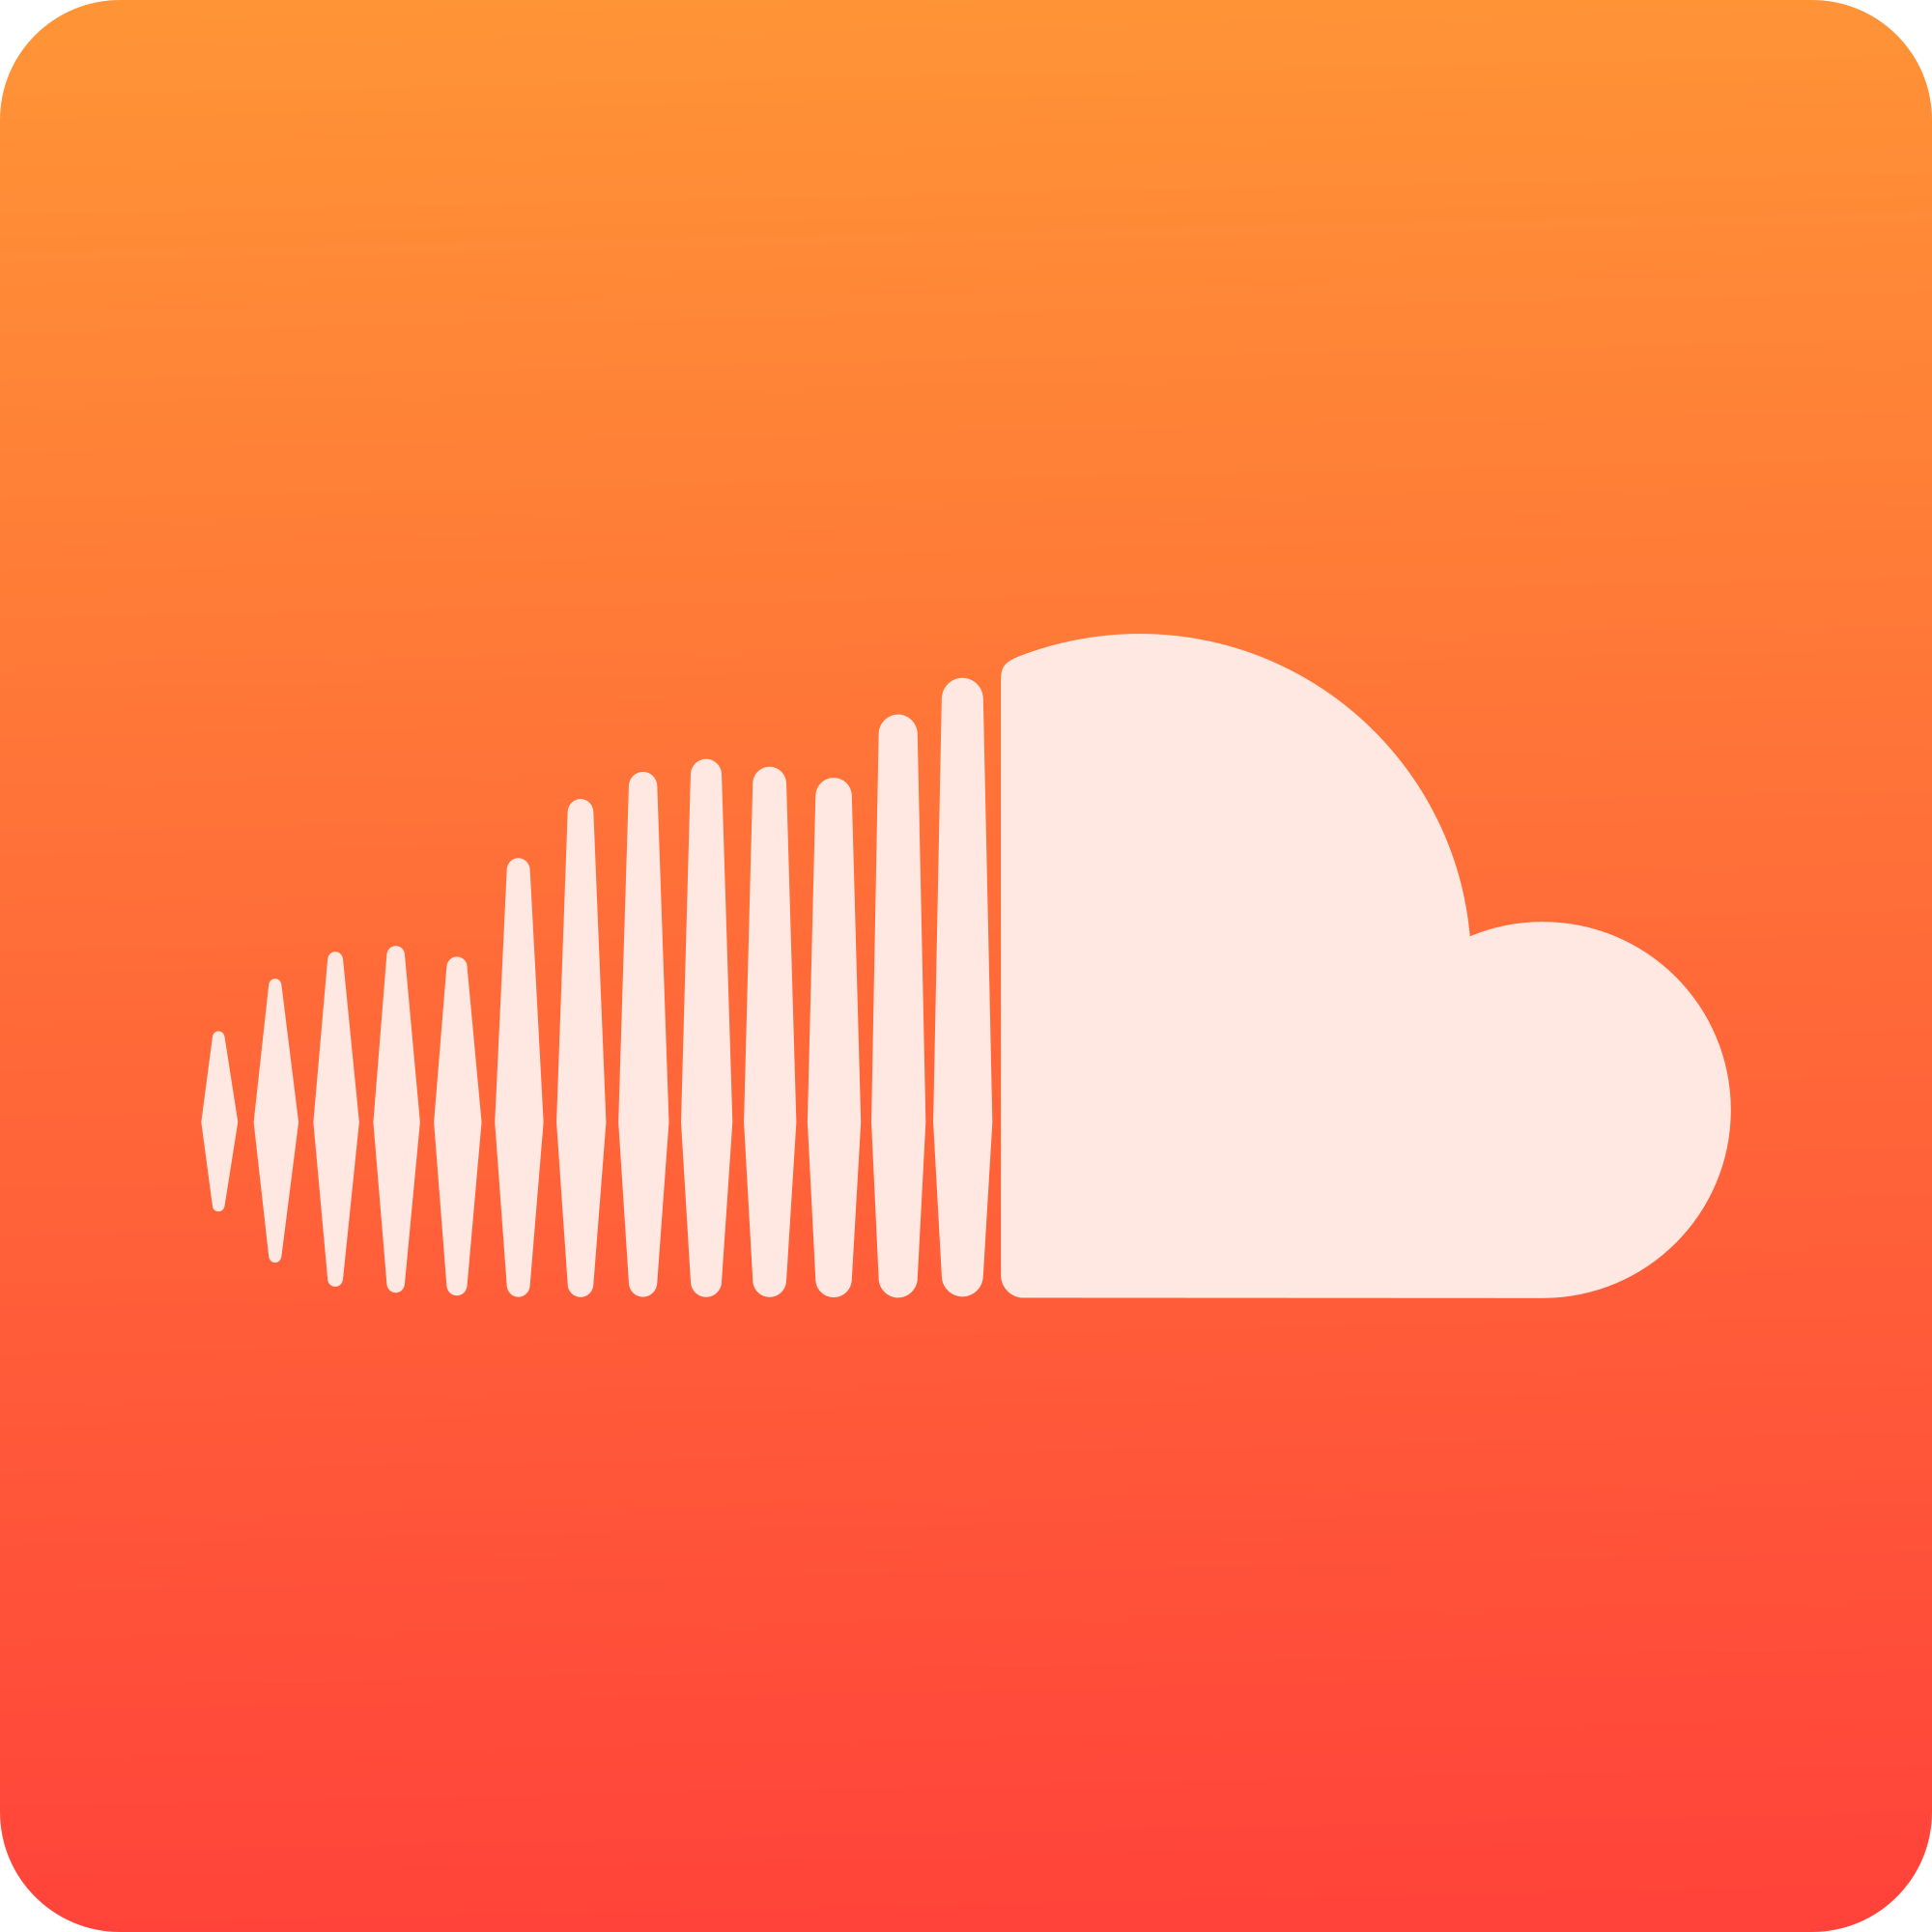 How To Download Soundcloud Mp3 Songs And Album Art - Music/Radio - Nigeria